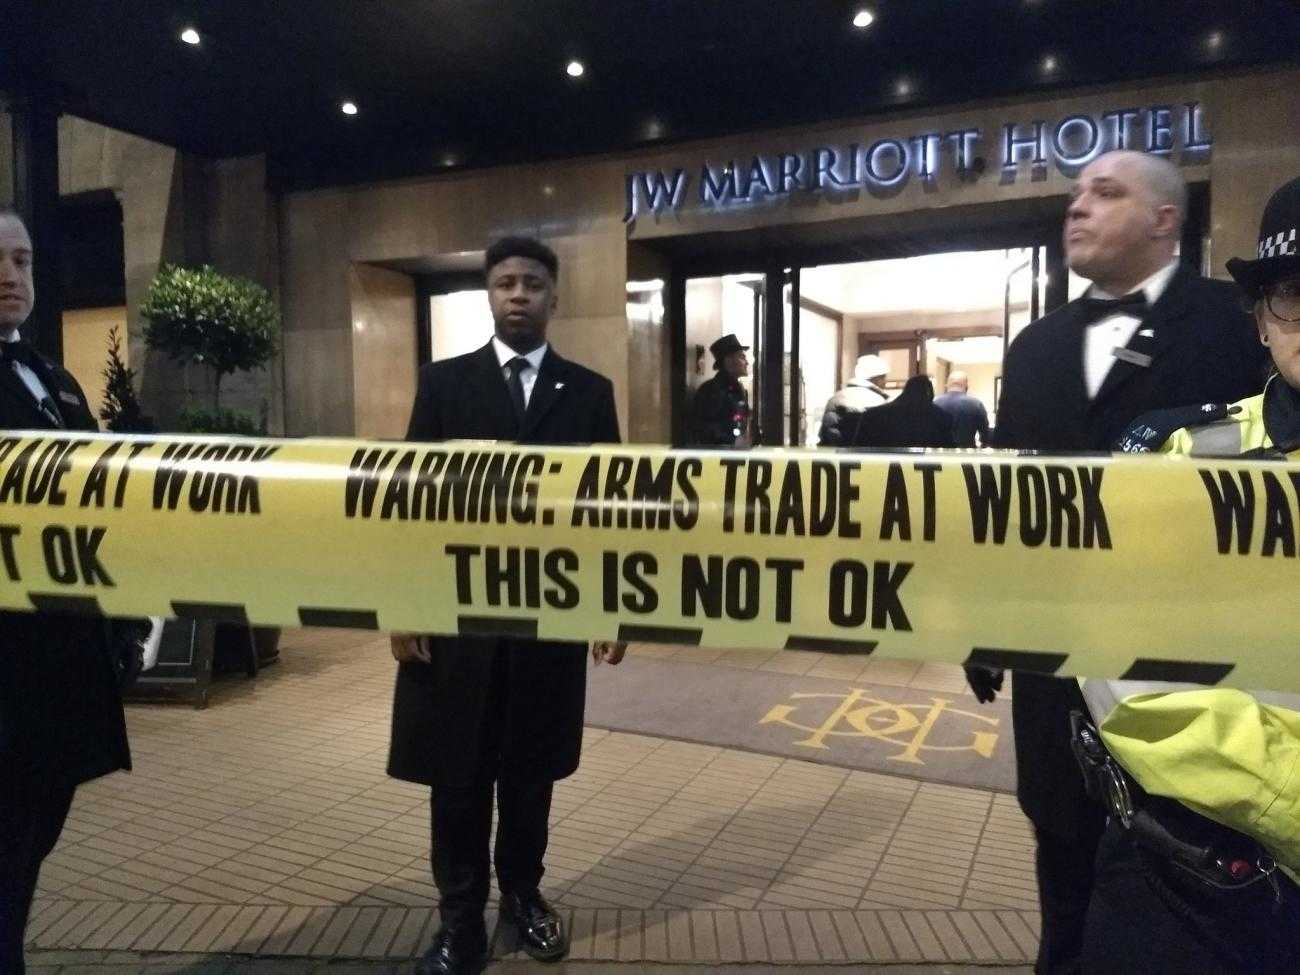 Three security guards stand at the door of a hotel. In the foreground is some fake security tape reading "Arms trade at work, this is not ok"